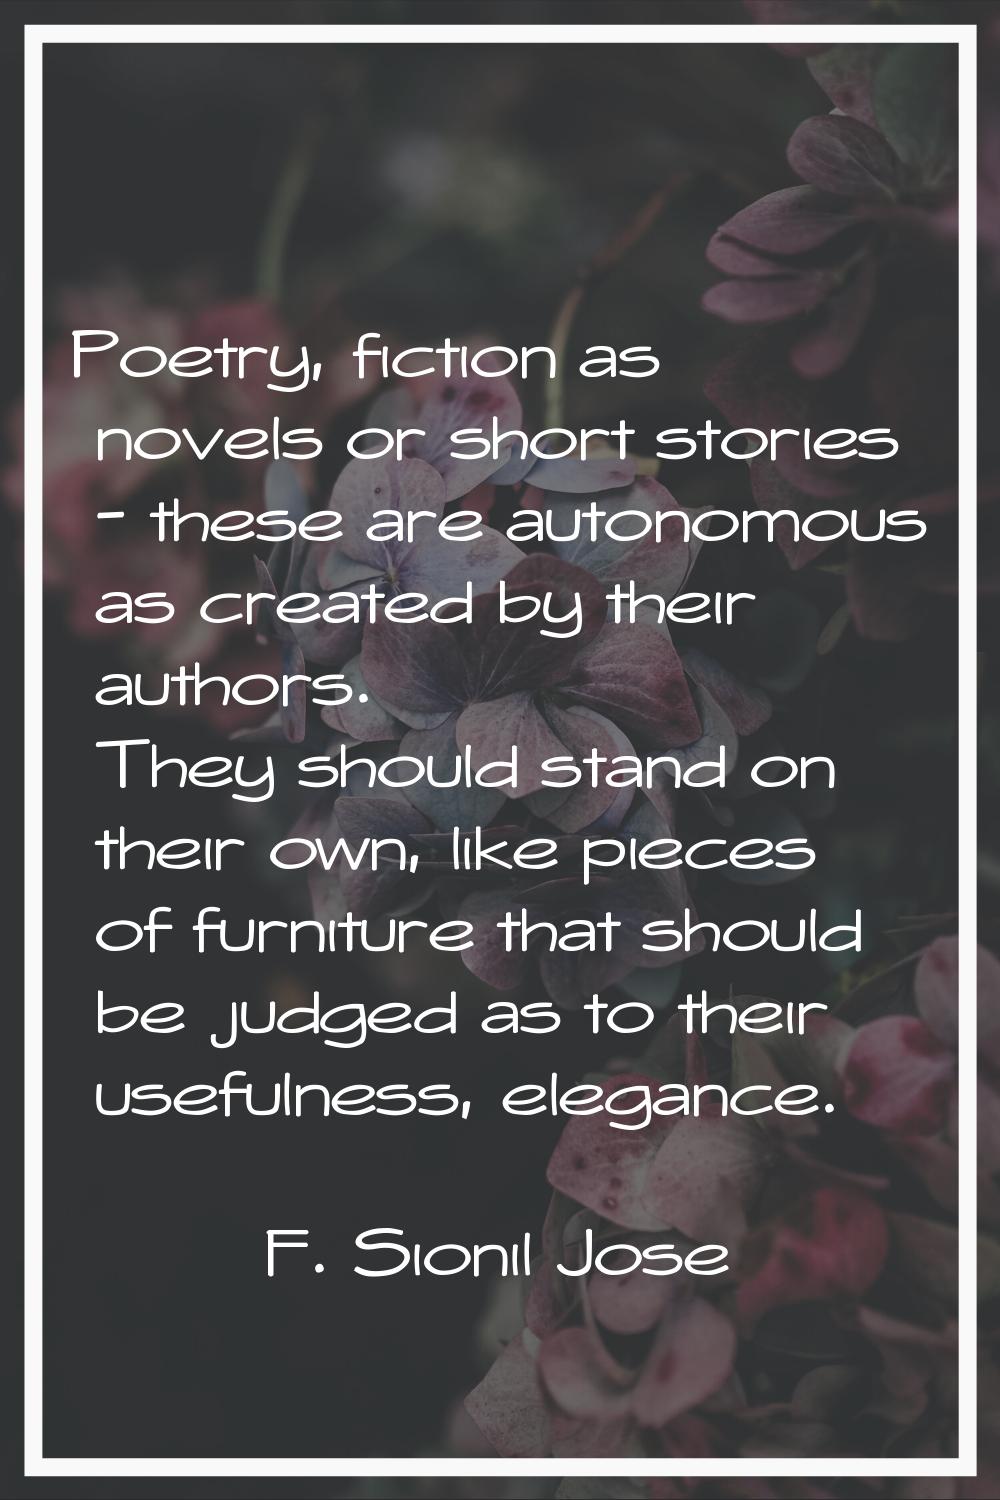 Poetry, fiction as novels or short stories - these are autonomous as created by their authors. They